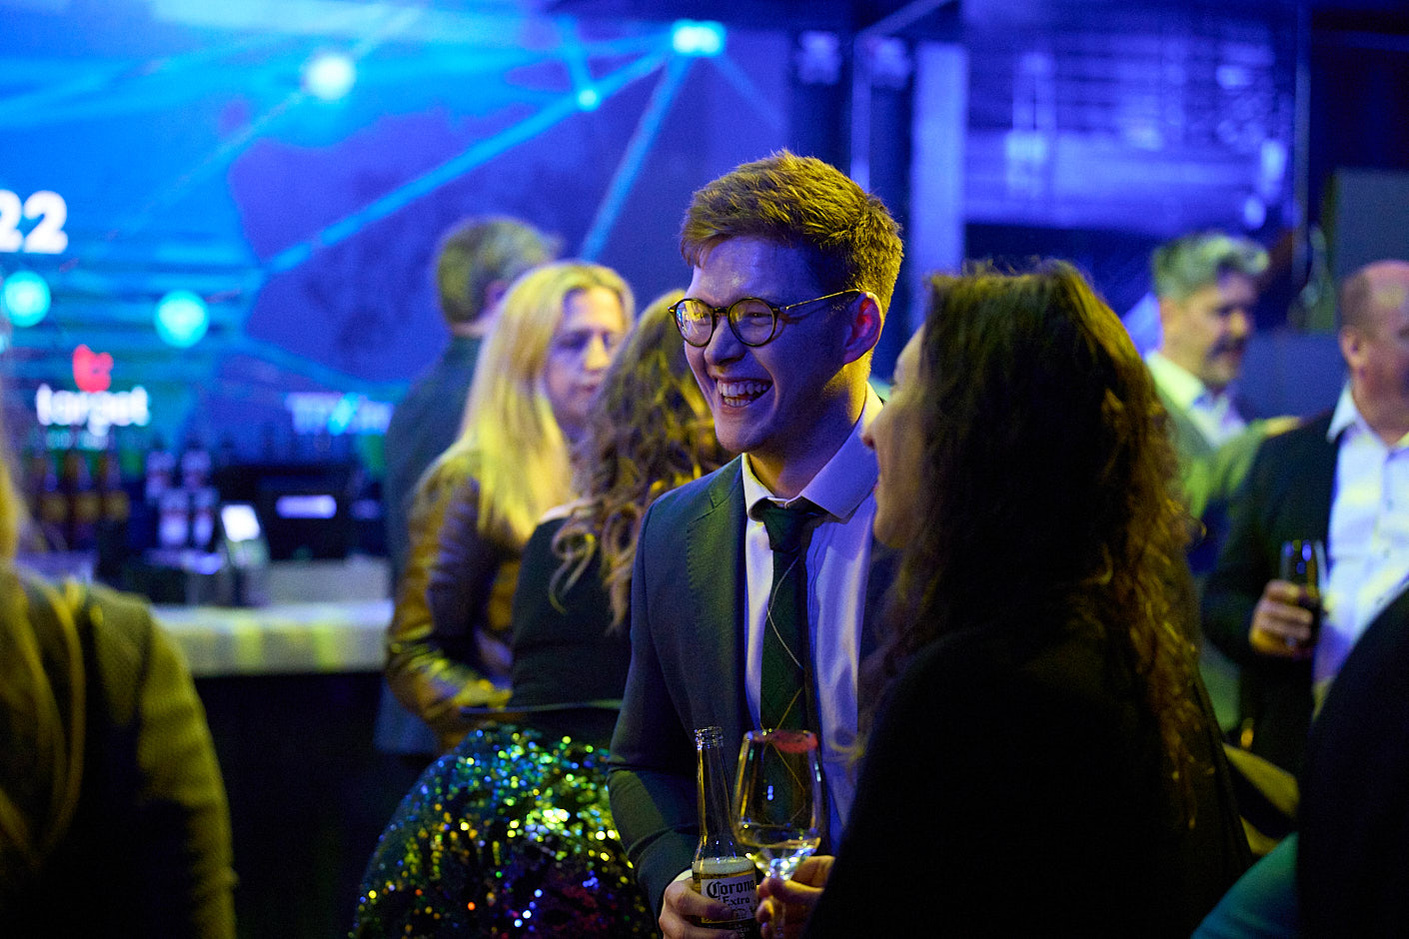 Candid award ceremony and corporate party photography by Josh Caius at Ministry, Southwark.